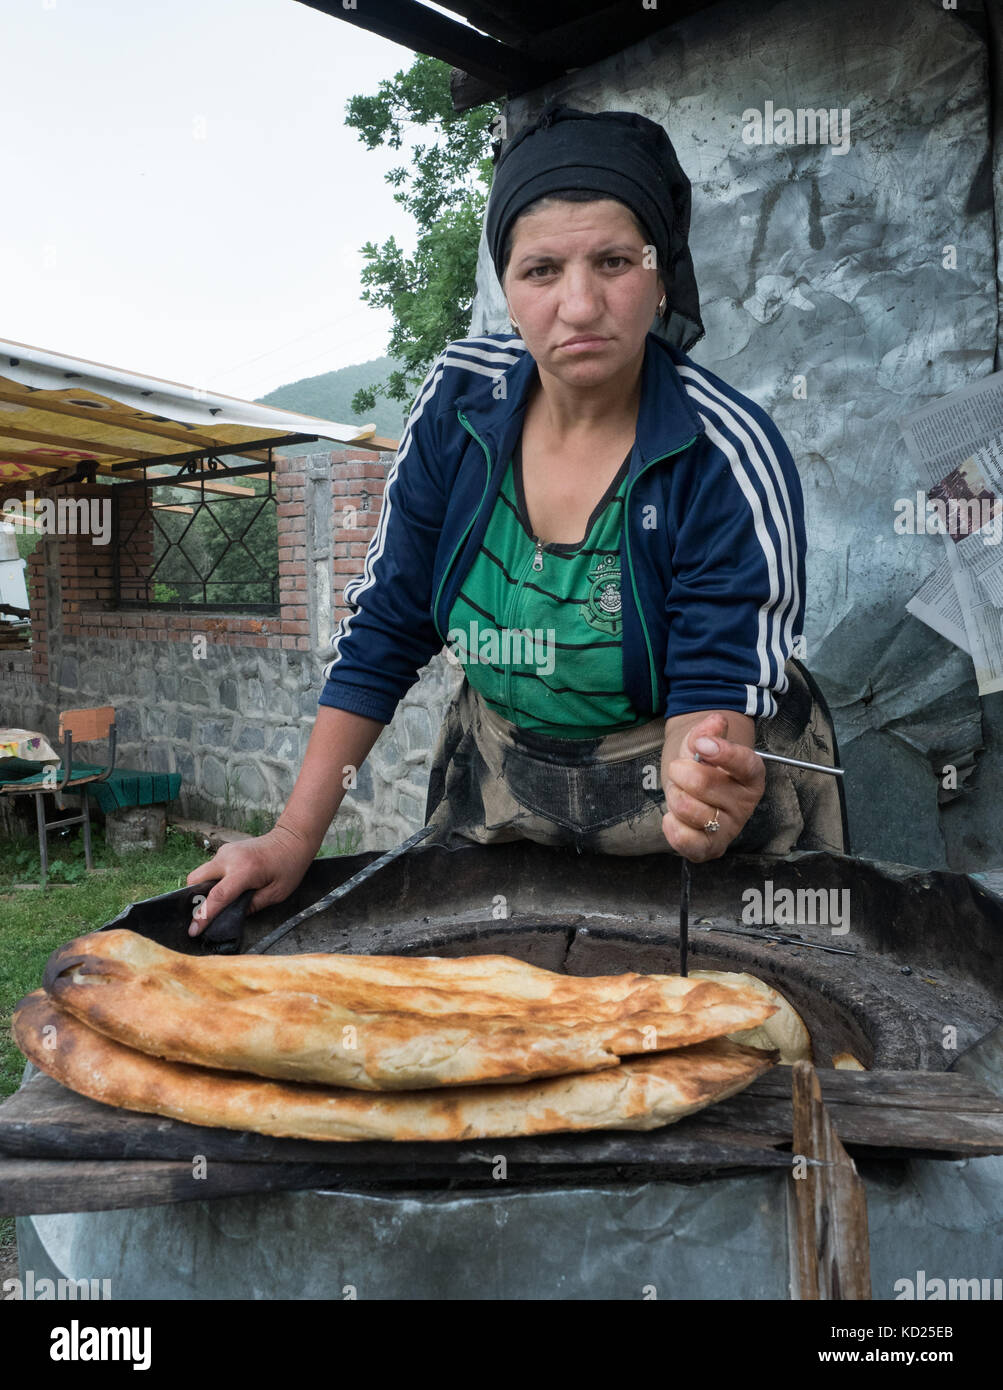 Qabala, Azerbaijan - May 20, 2017 : portrait of a woman making traditional bread . A special metal hook is used to hold the bread to the walls or take Stock Photo